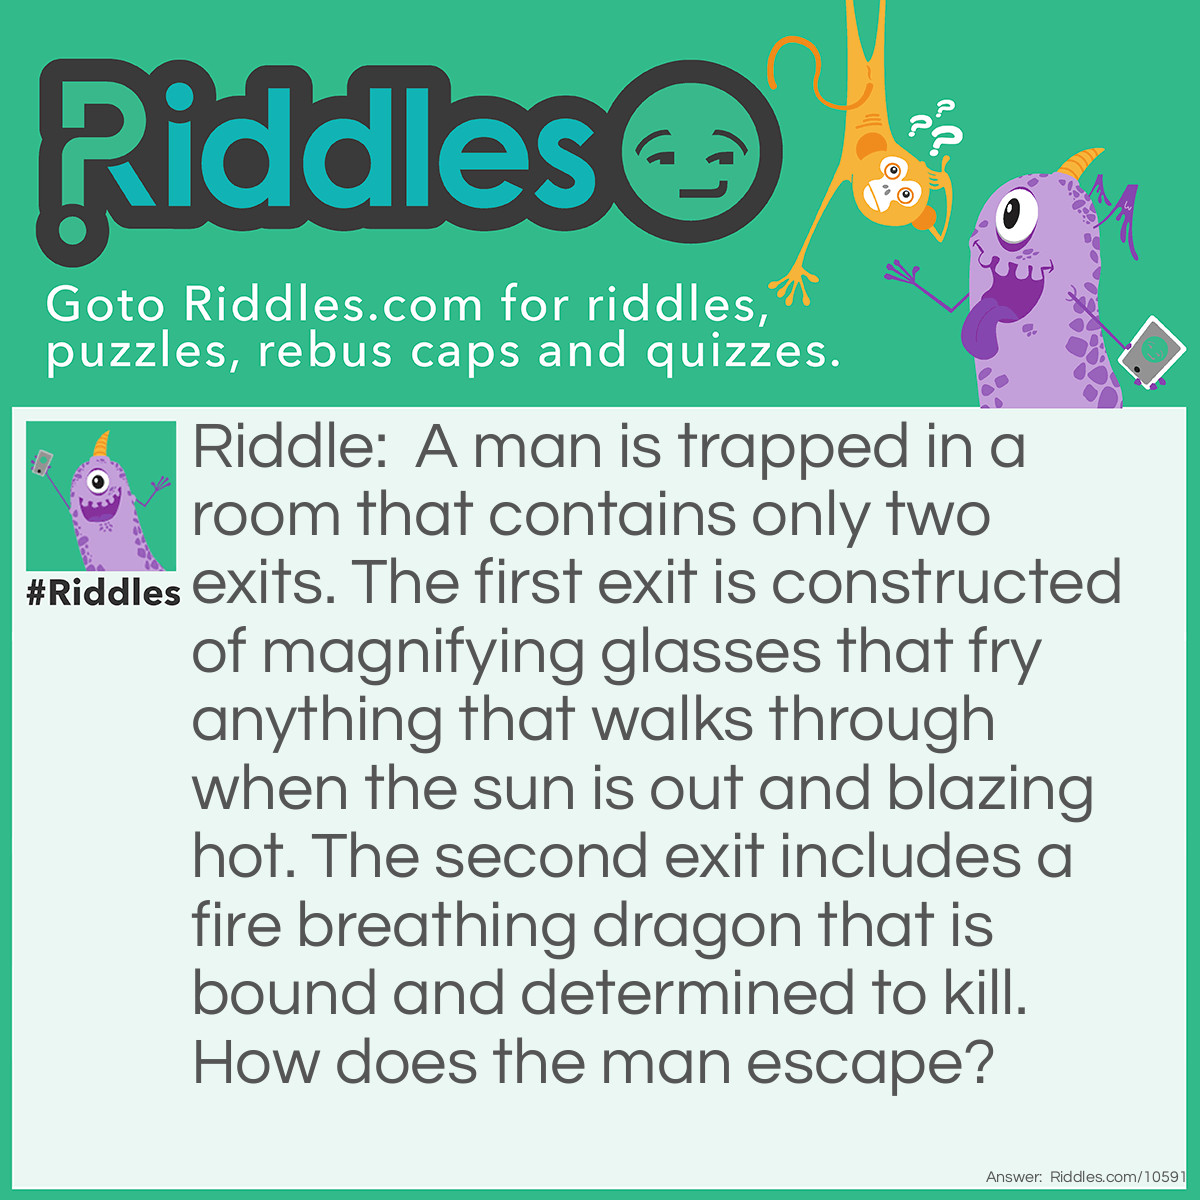 Riddle: A man is trapped in a room that contains only two exits. The first exit is constructed of magnifying glasses that fry anything that walks through when the sun is out and blazing hot. The second exit includes a fire breathing dragon that is bound and determined to kill. How does the man escape? Answer: He waits until nighttime and then runs through the first exit.